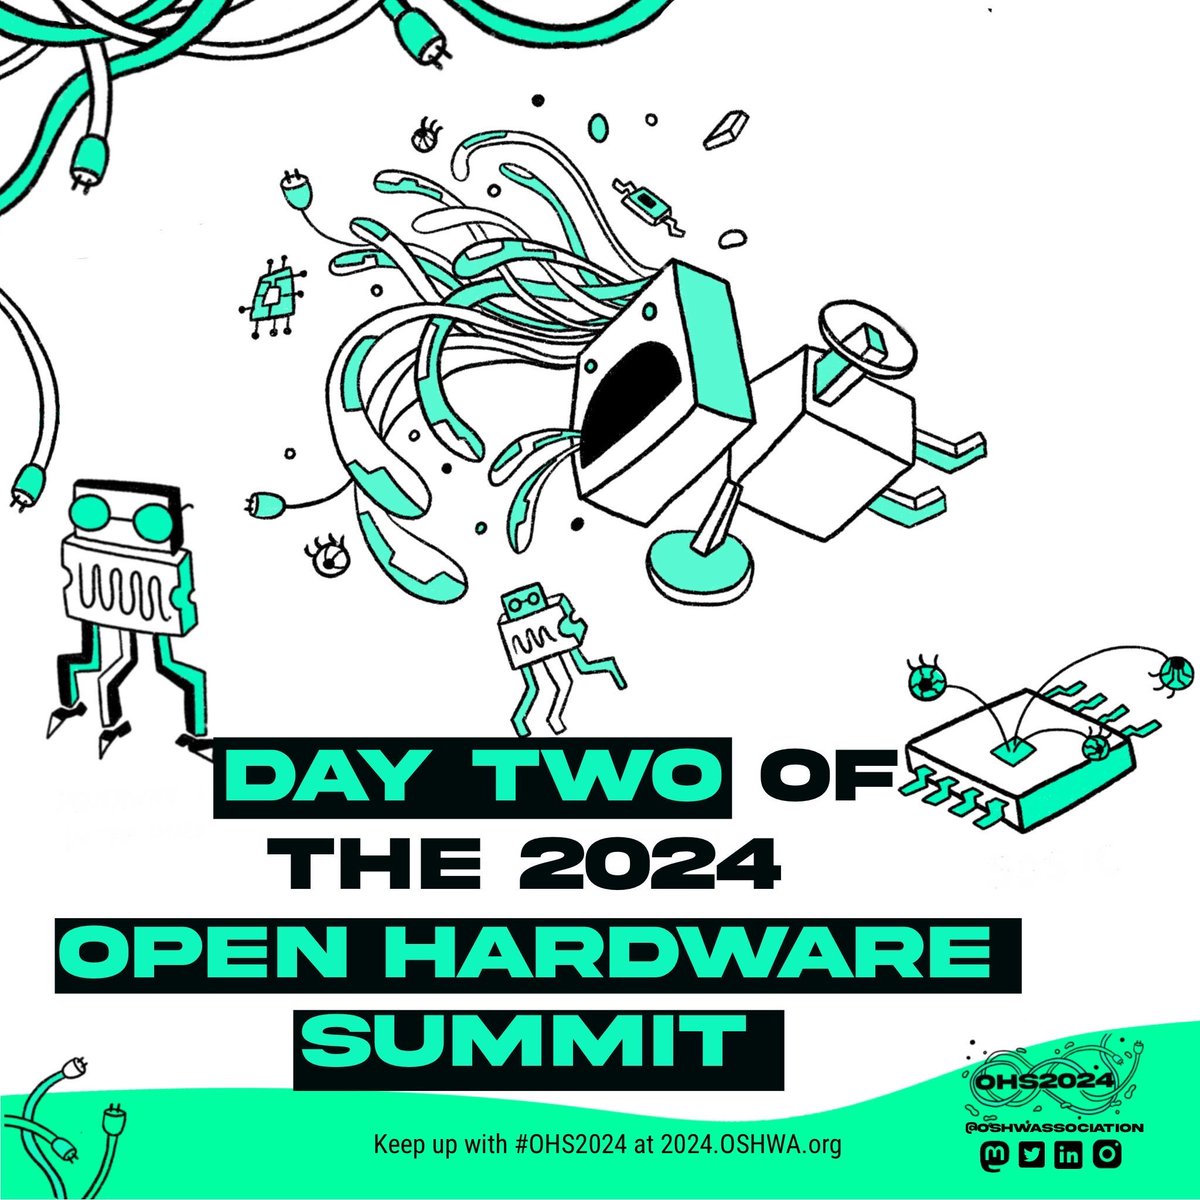 Looking forward to another incredible Summit day! Doors open at 10am today IRL folks, online attendees the virtual unconference will begin 11am!